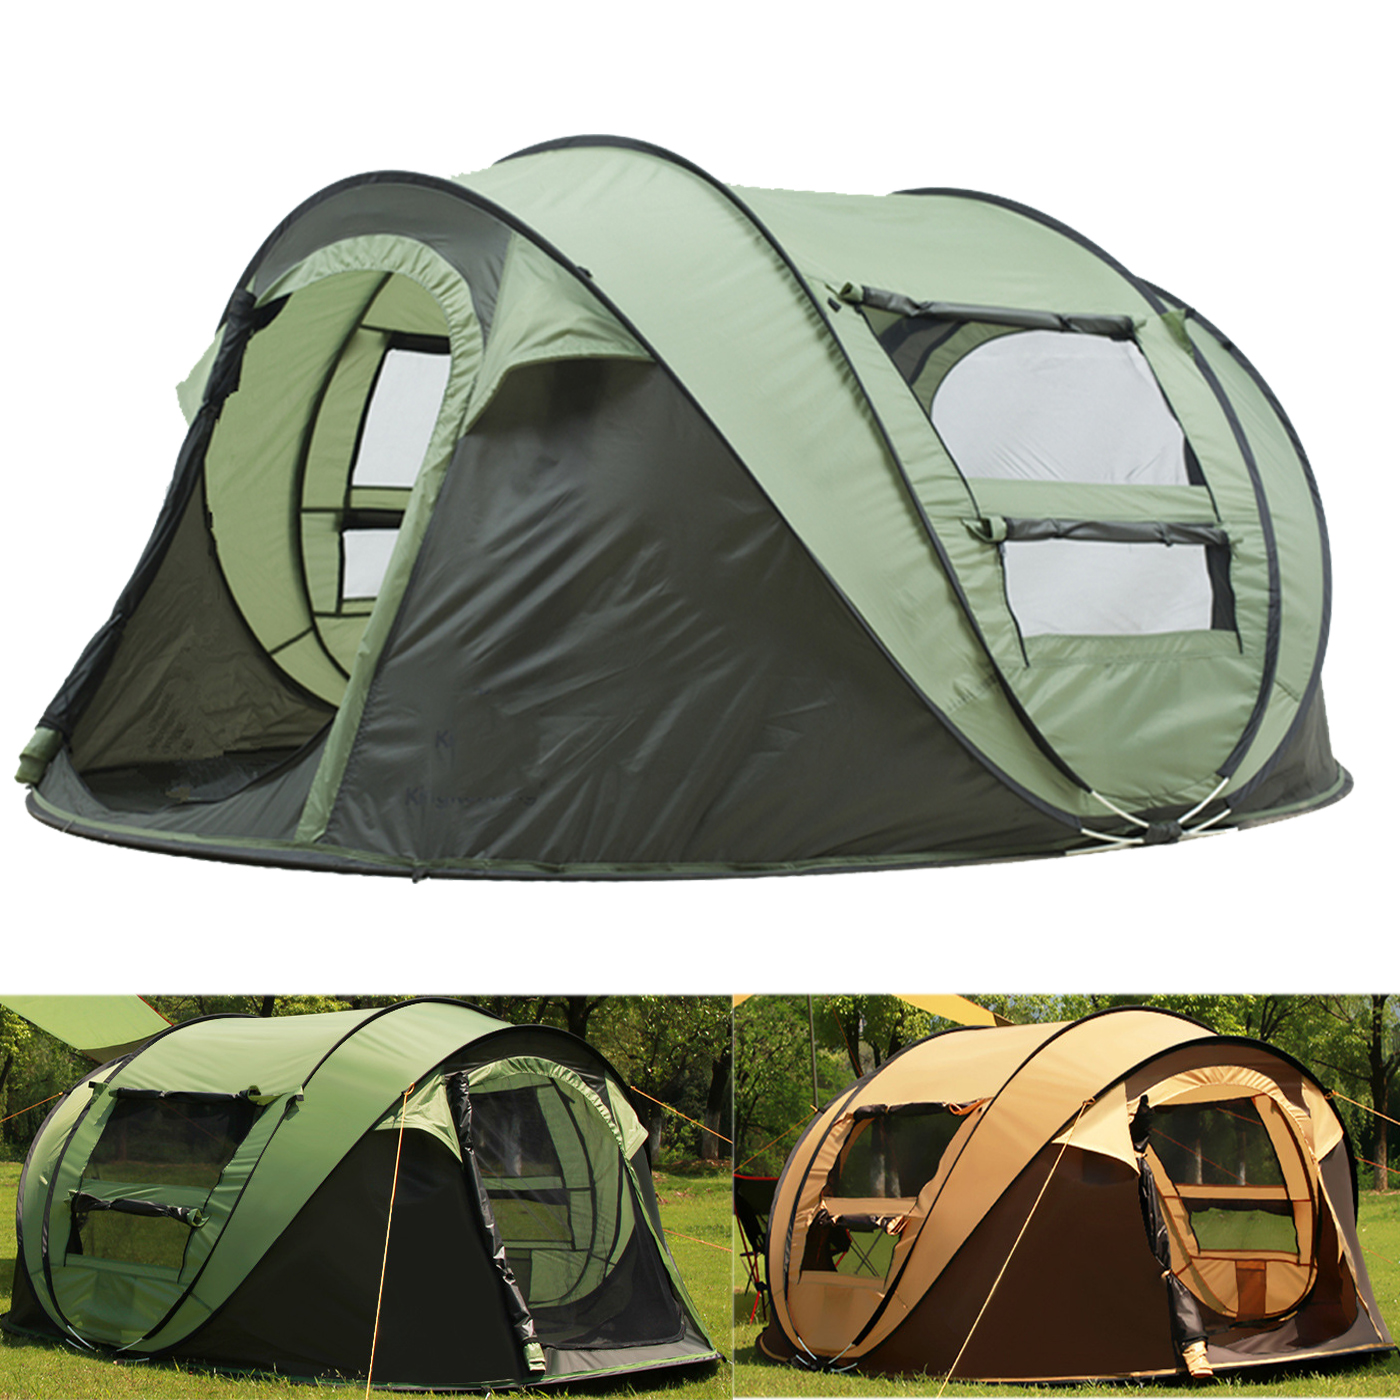 

Outdoor 3-4 Persons Camping Tent Automatic Opening Waterproof Windproof Beach Sunshade Canopy